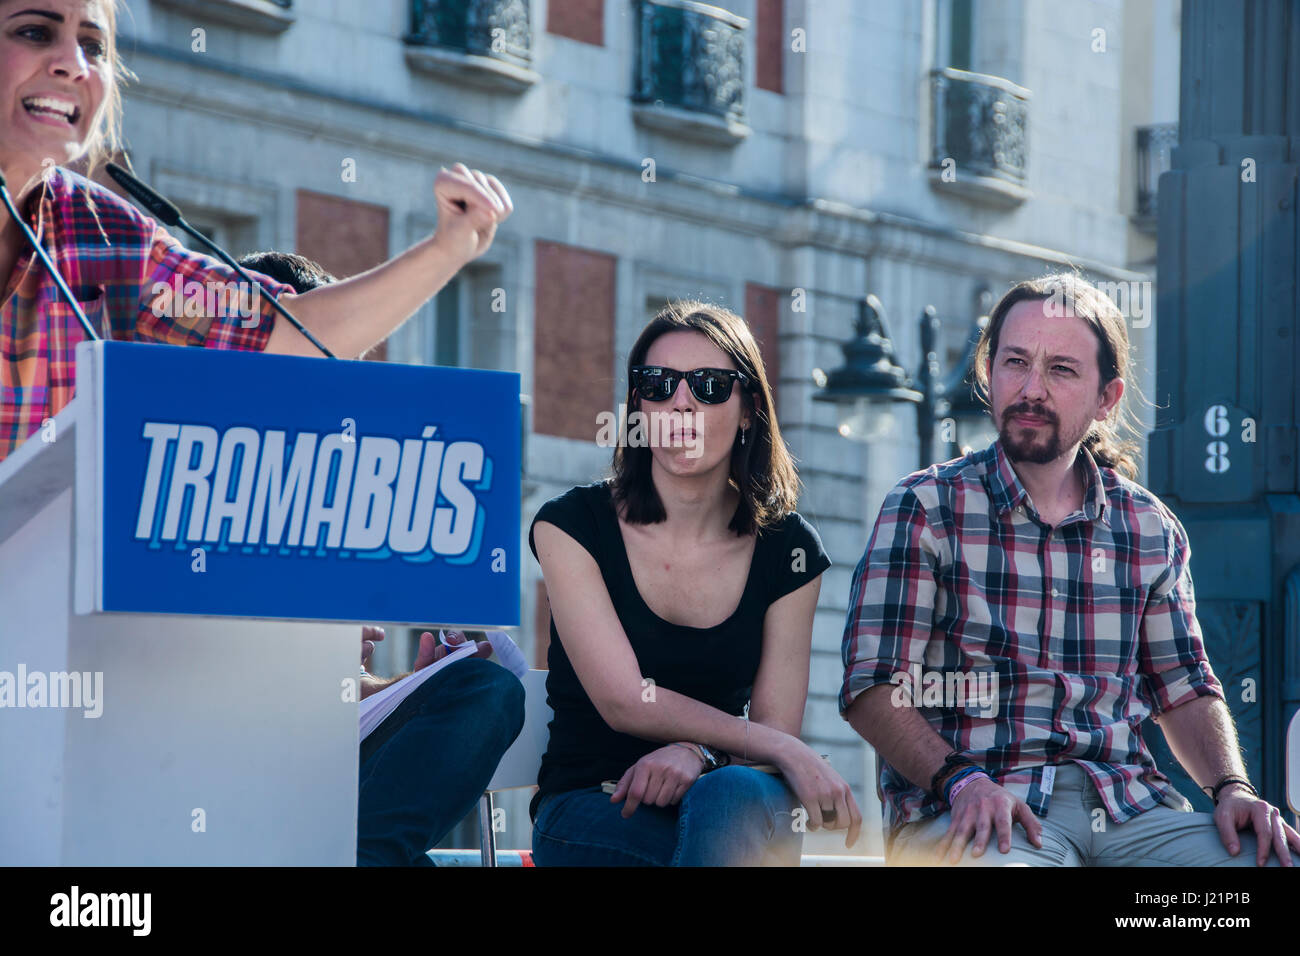 Madrid, Spain. 23rd April, 2017. meeting of podemos with pablo iglesias with el tramabus a blue bus that circulate around madrid city and in the bus its draw a different politic characters with charges of corruption Credit: Alberto Sibaja Ramírez/Alamy Live News Stock Photo